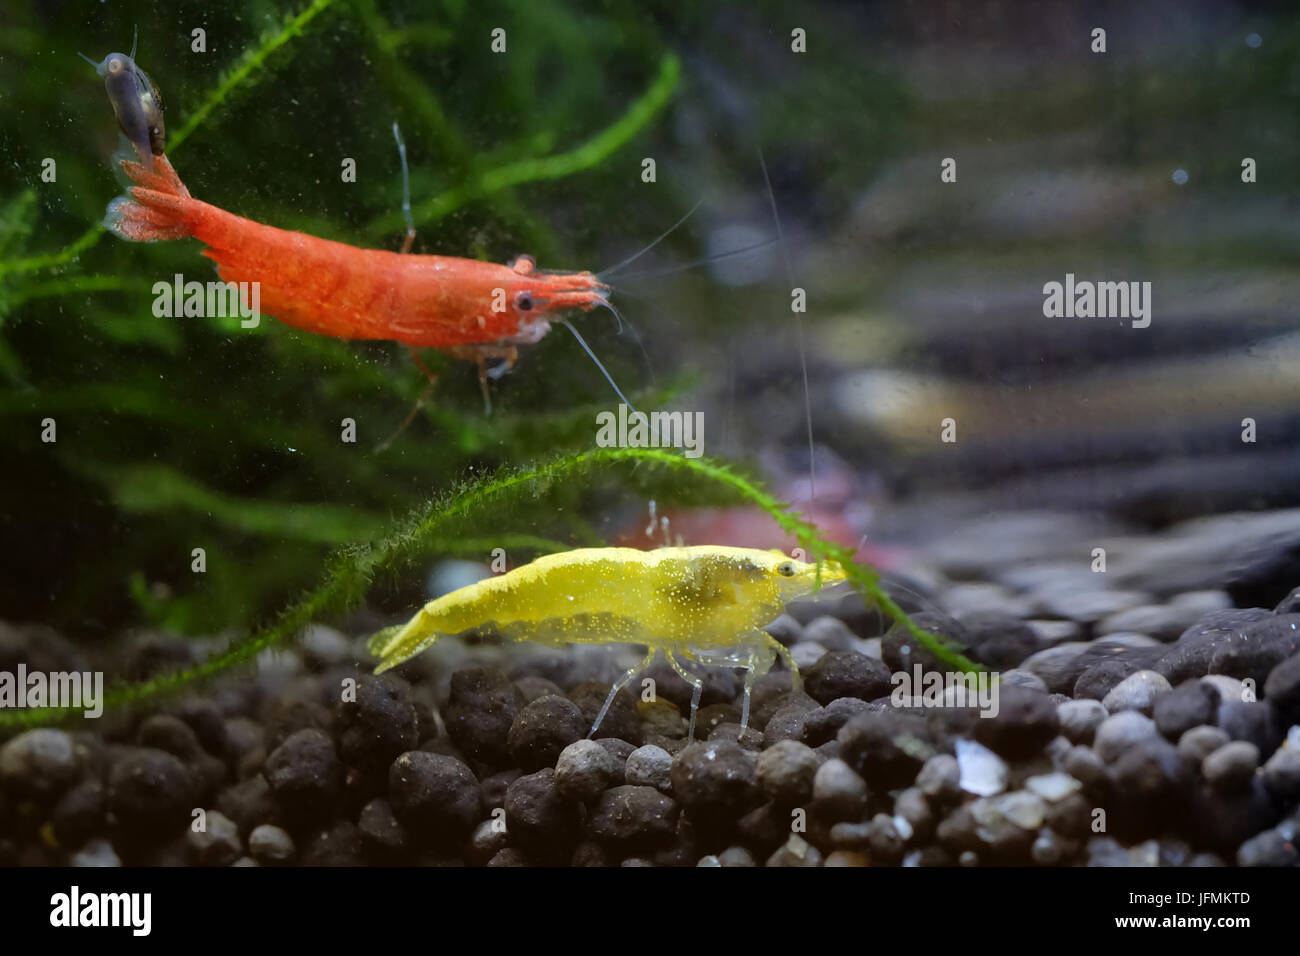 Portrait of a Golden Yellow Shrimp with a Red Cherry Shrimp Stock Photo